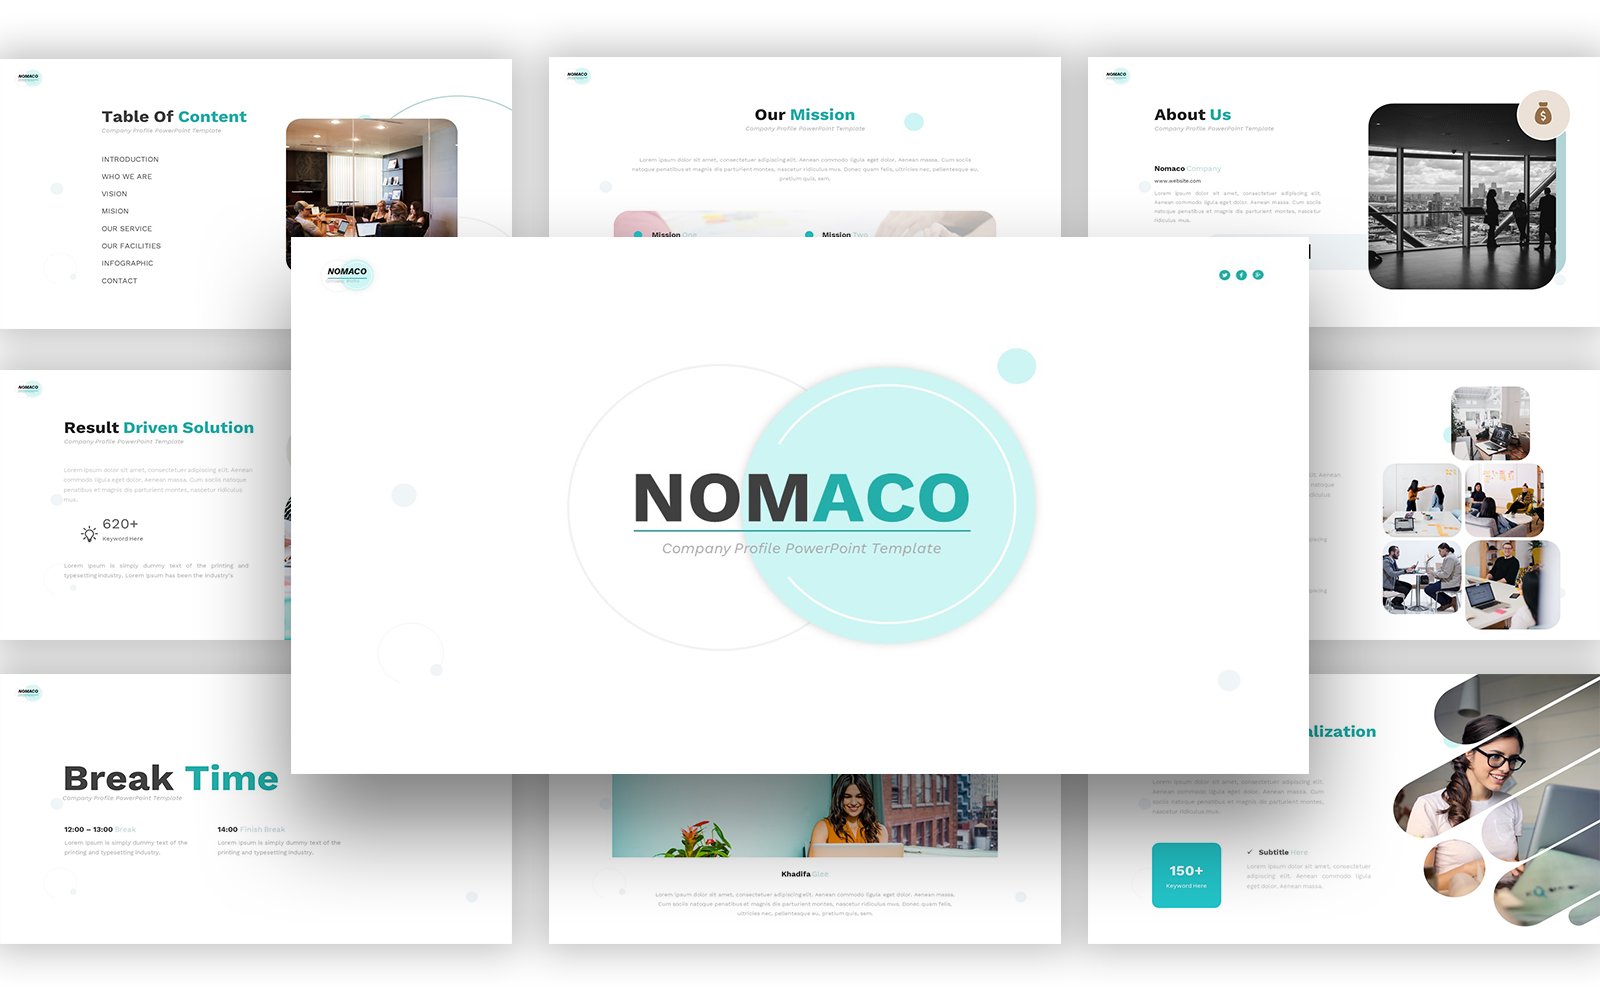 Nomaco Company Profile Powerpoint Template